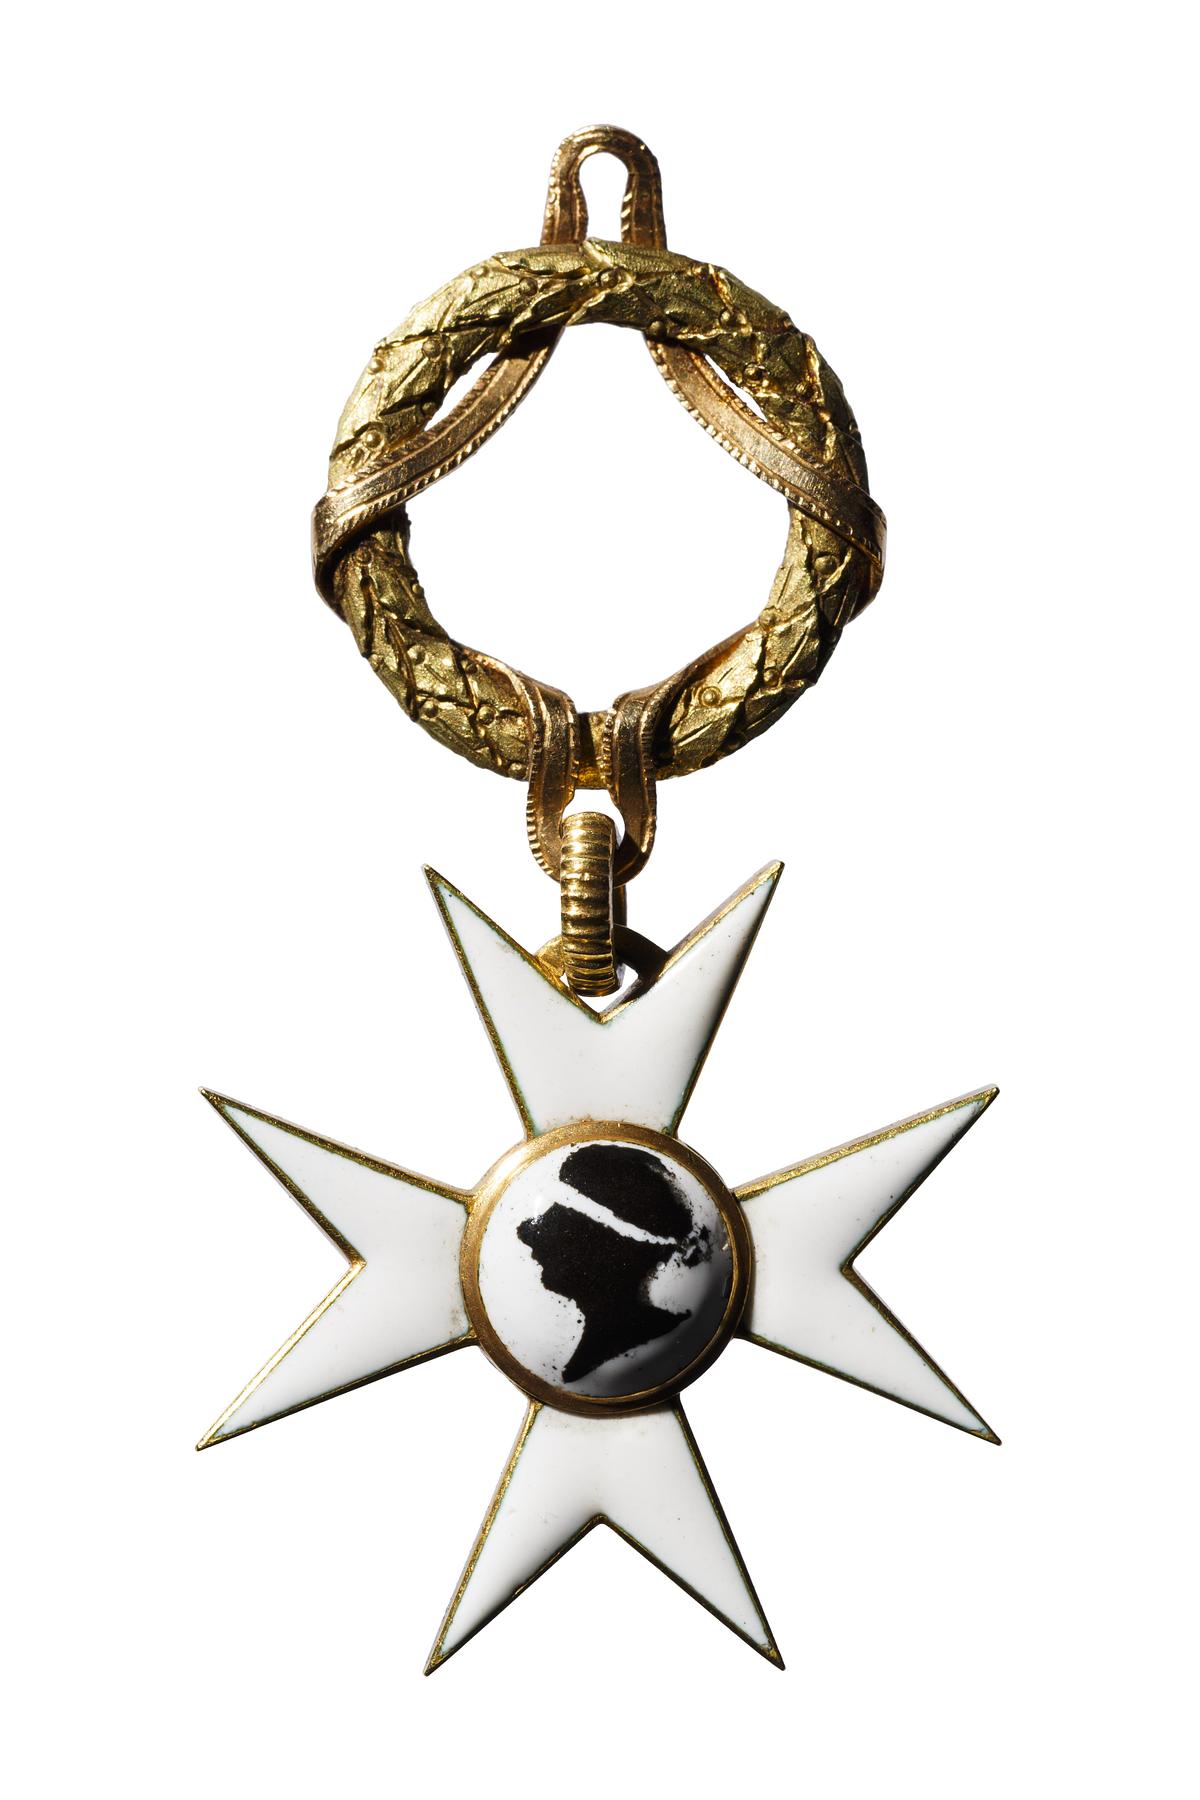 Order of the Moor (Ordine del Moretto) from Accademia di S. Luca, N23